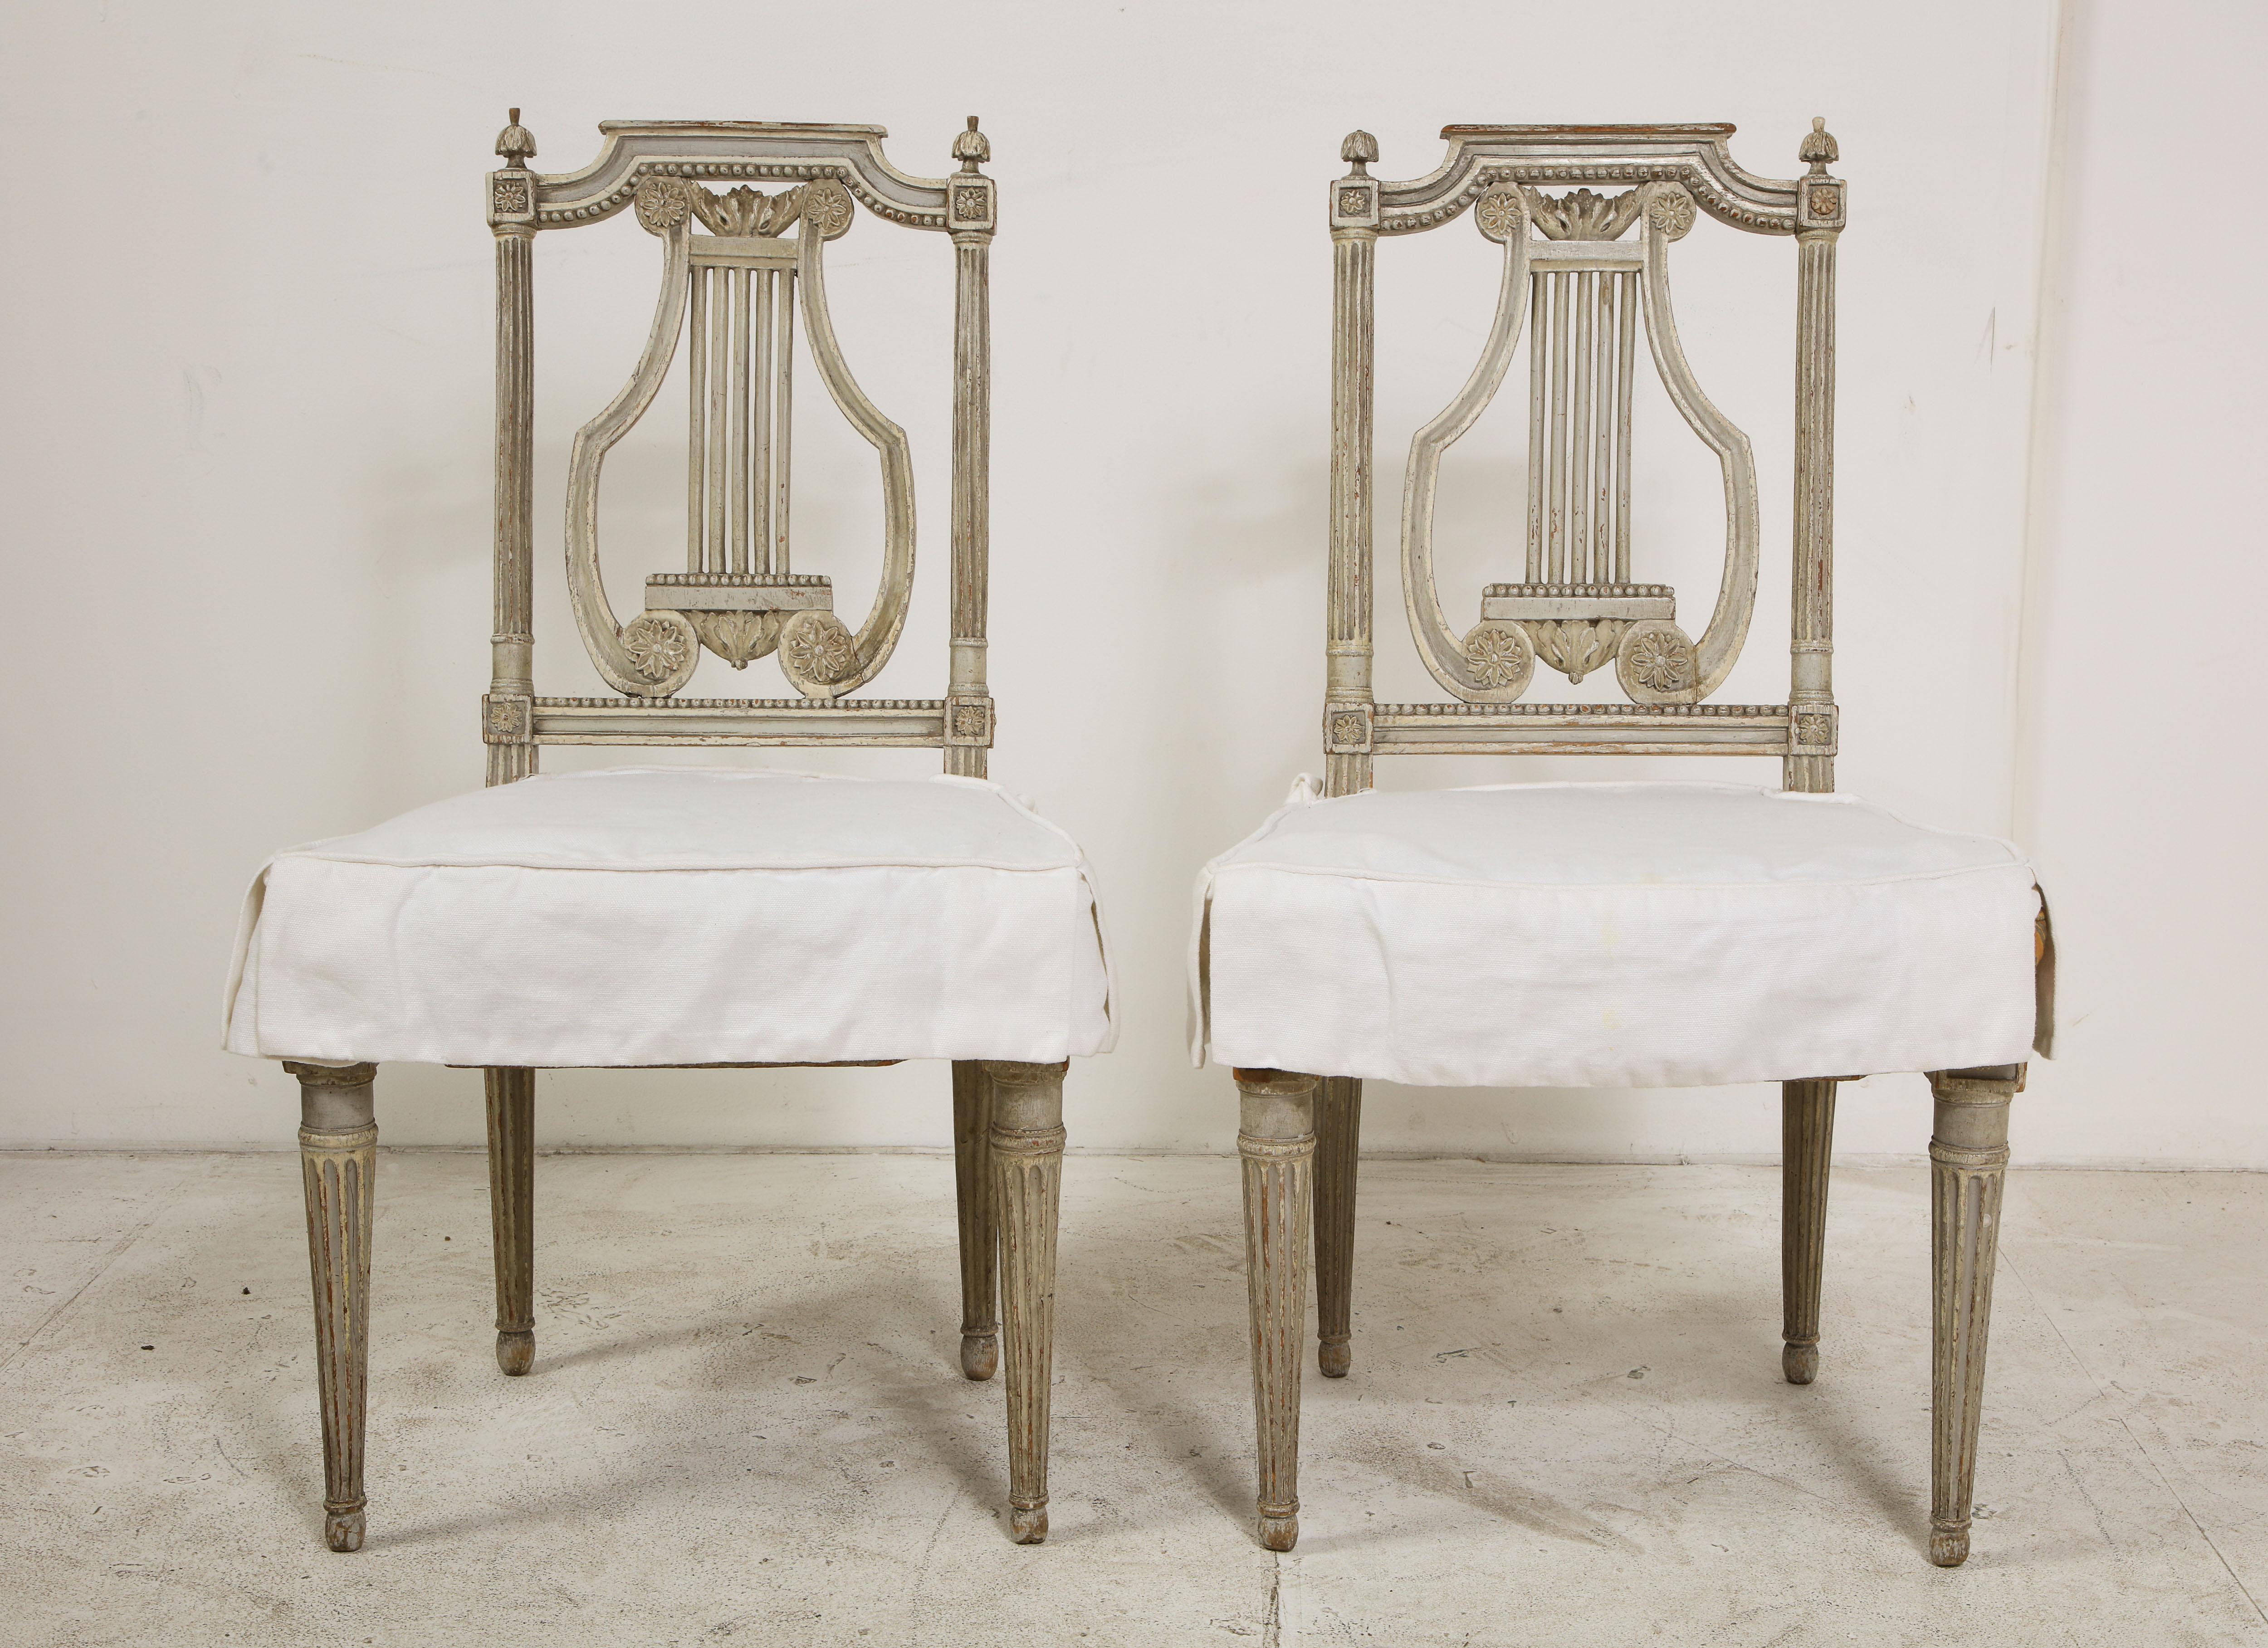 Pair of 19th century Italian painted lyre-back side chairs. Welted seat cushions in Fortuny Damask fabric, also with white cotton slipcovers.